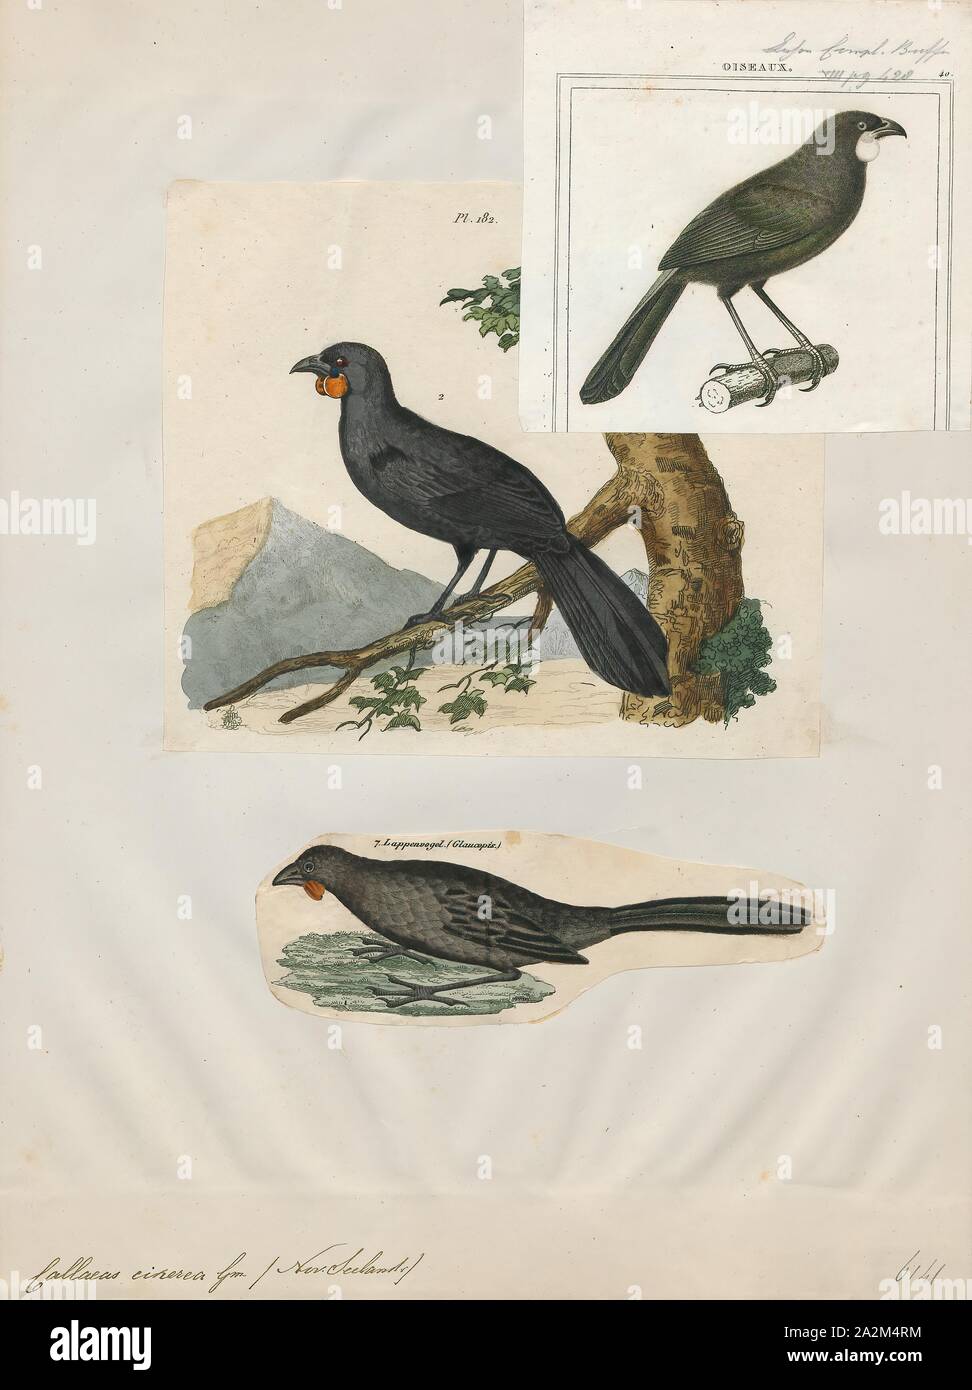 Callaeas cinerea, Print, The South Island kōkako (Callaeas cinereus) is a possibly extinct forest bird endemic to the South Island of New Zealand. Unlike its close relative the North Island kōkako it has largely orange wattles, with only a small patch of blue at the base, and was also known as the orange-wattled crow (though it was not a corvid). The last accepted sighting in 2007 was the first considered genuine since 1967, although there have been several other unauthenticated reports., 1833-1839 Stock Photo